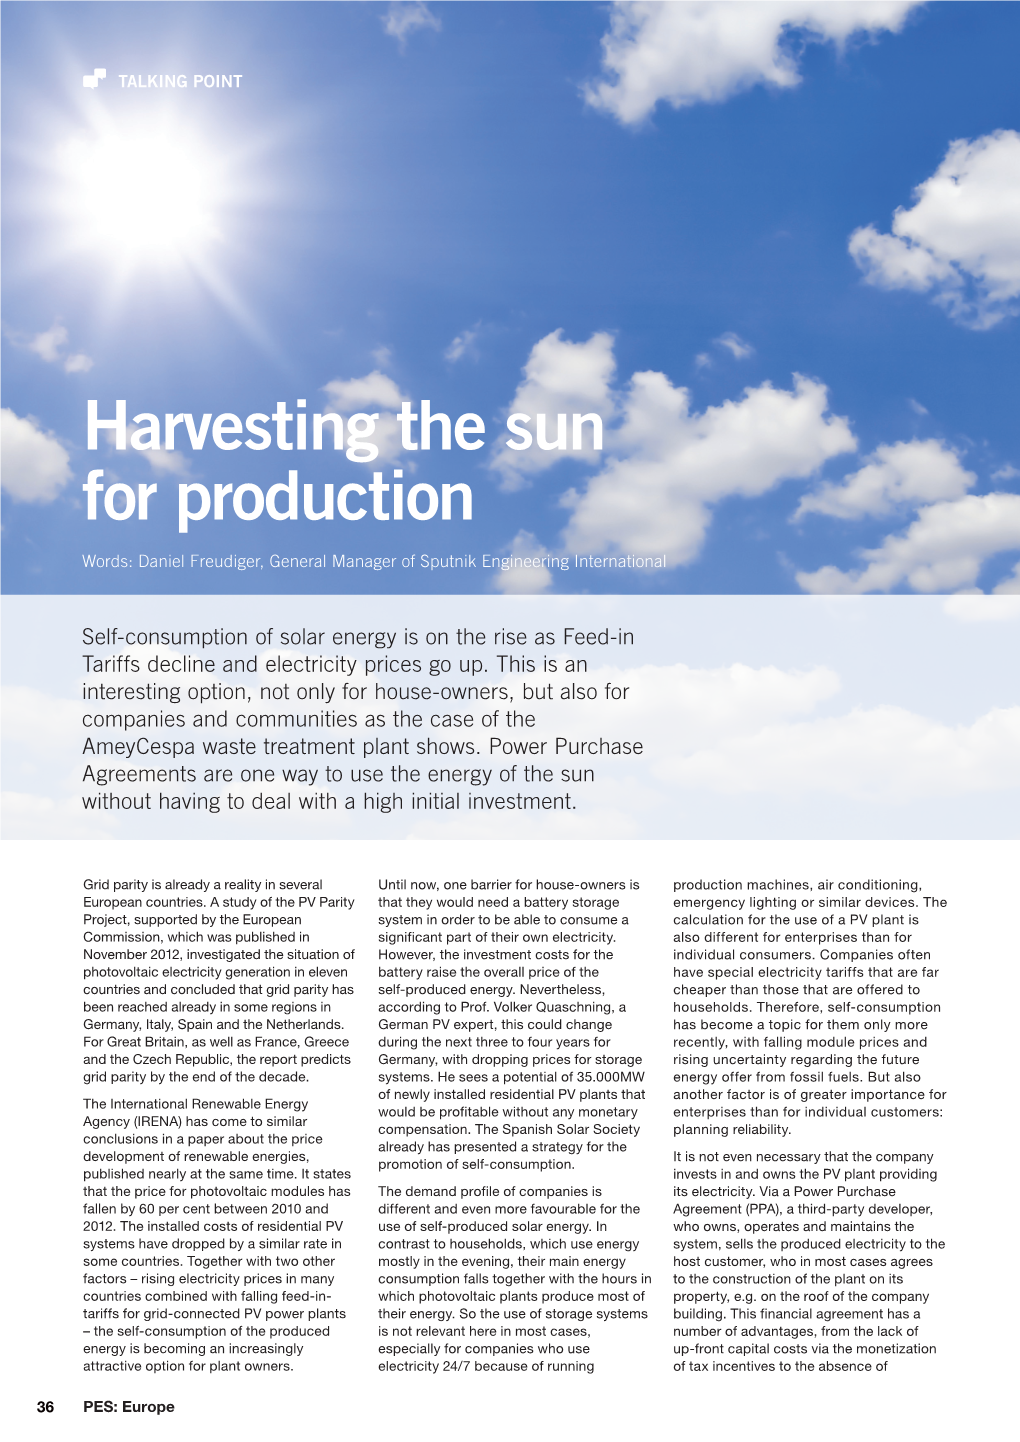 Harvesting the Sun for Production